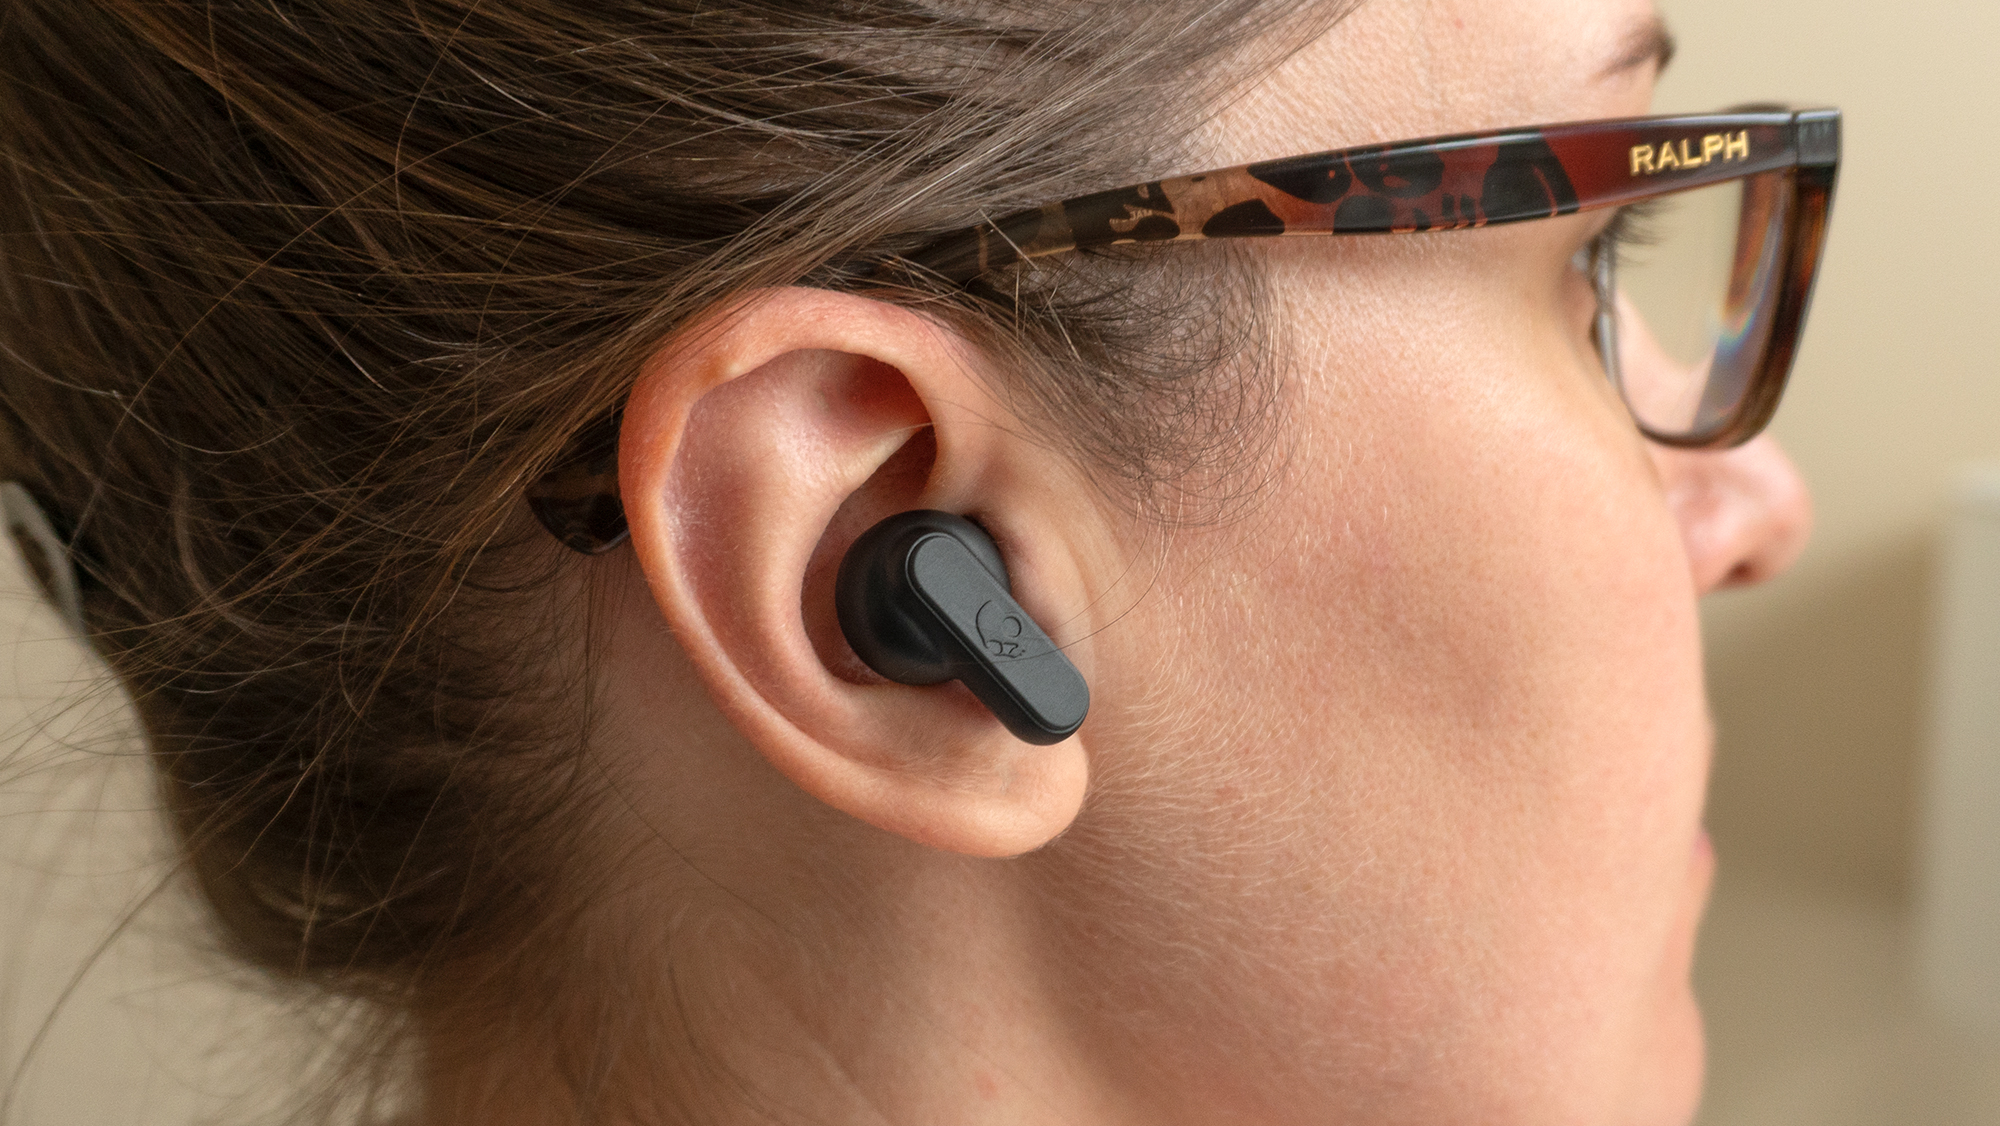 The design of the Skullcandy Dime allows them to nestle into your ear, and because they're lightweight, they're also very comfortable to wear. (Photo: Andrew Liszewski/Gizmodo)